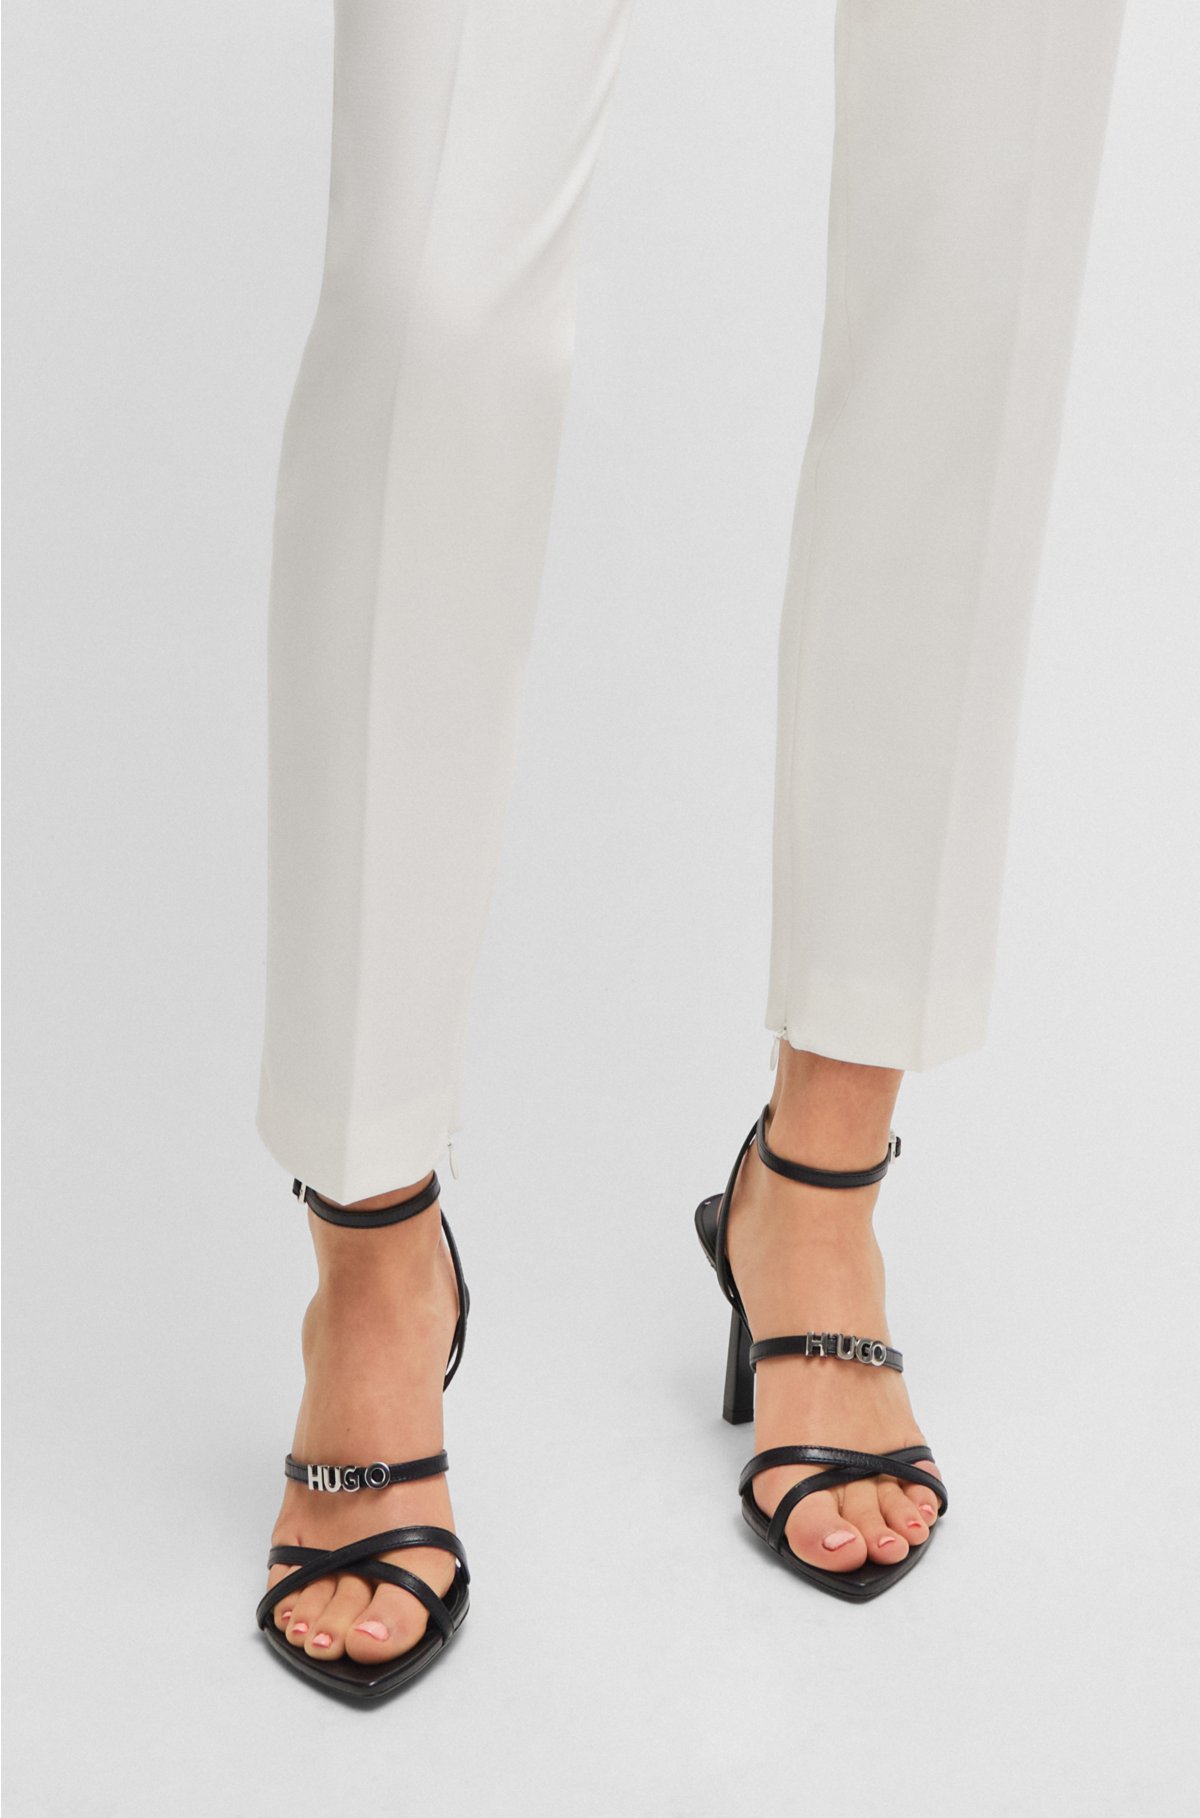 Slim-fit trousers with zip hems, White